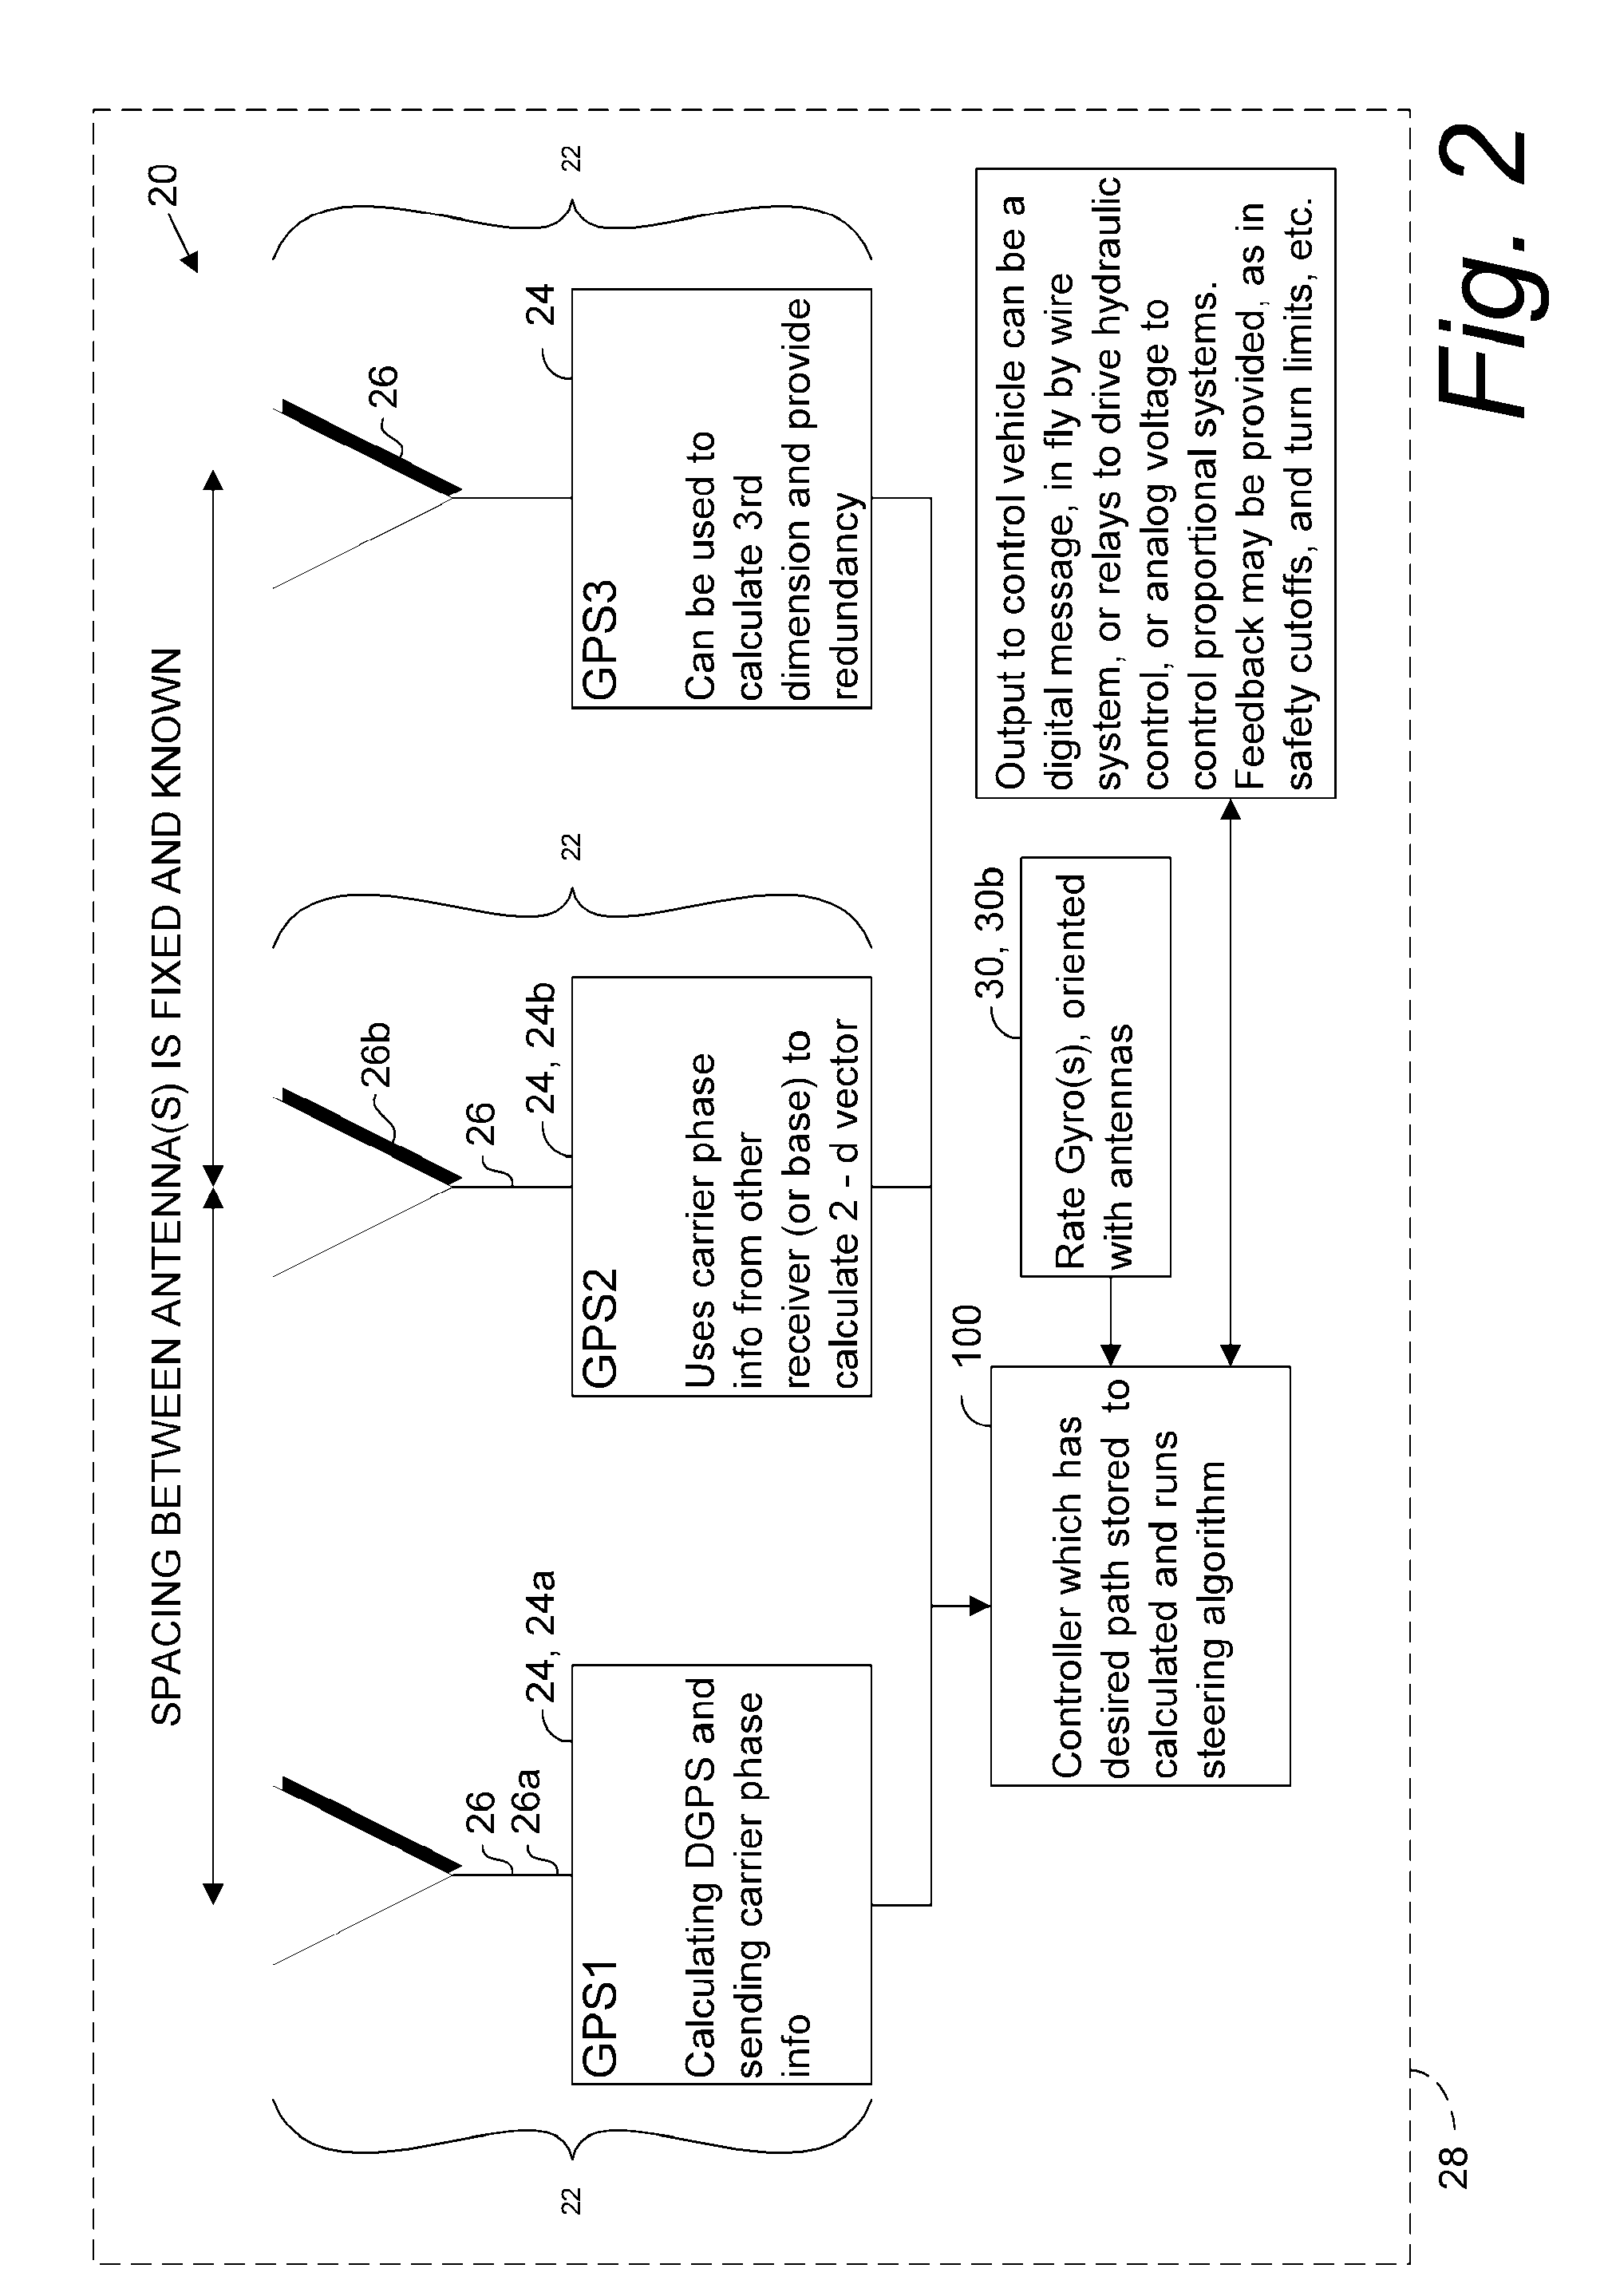 GNSS based control for dispensing material from vehicle